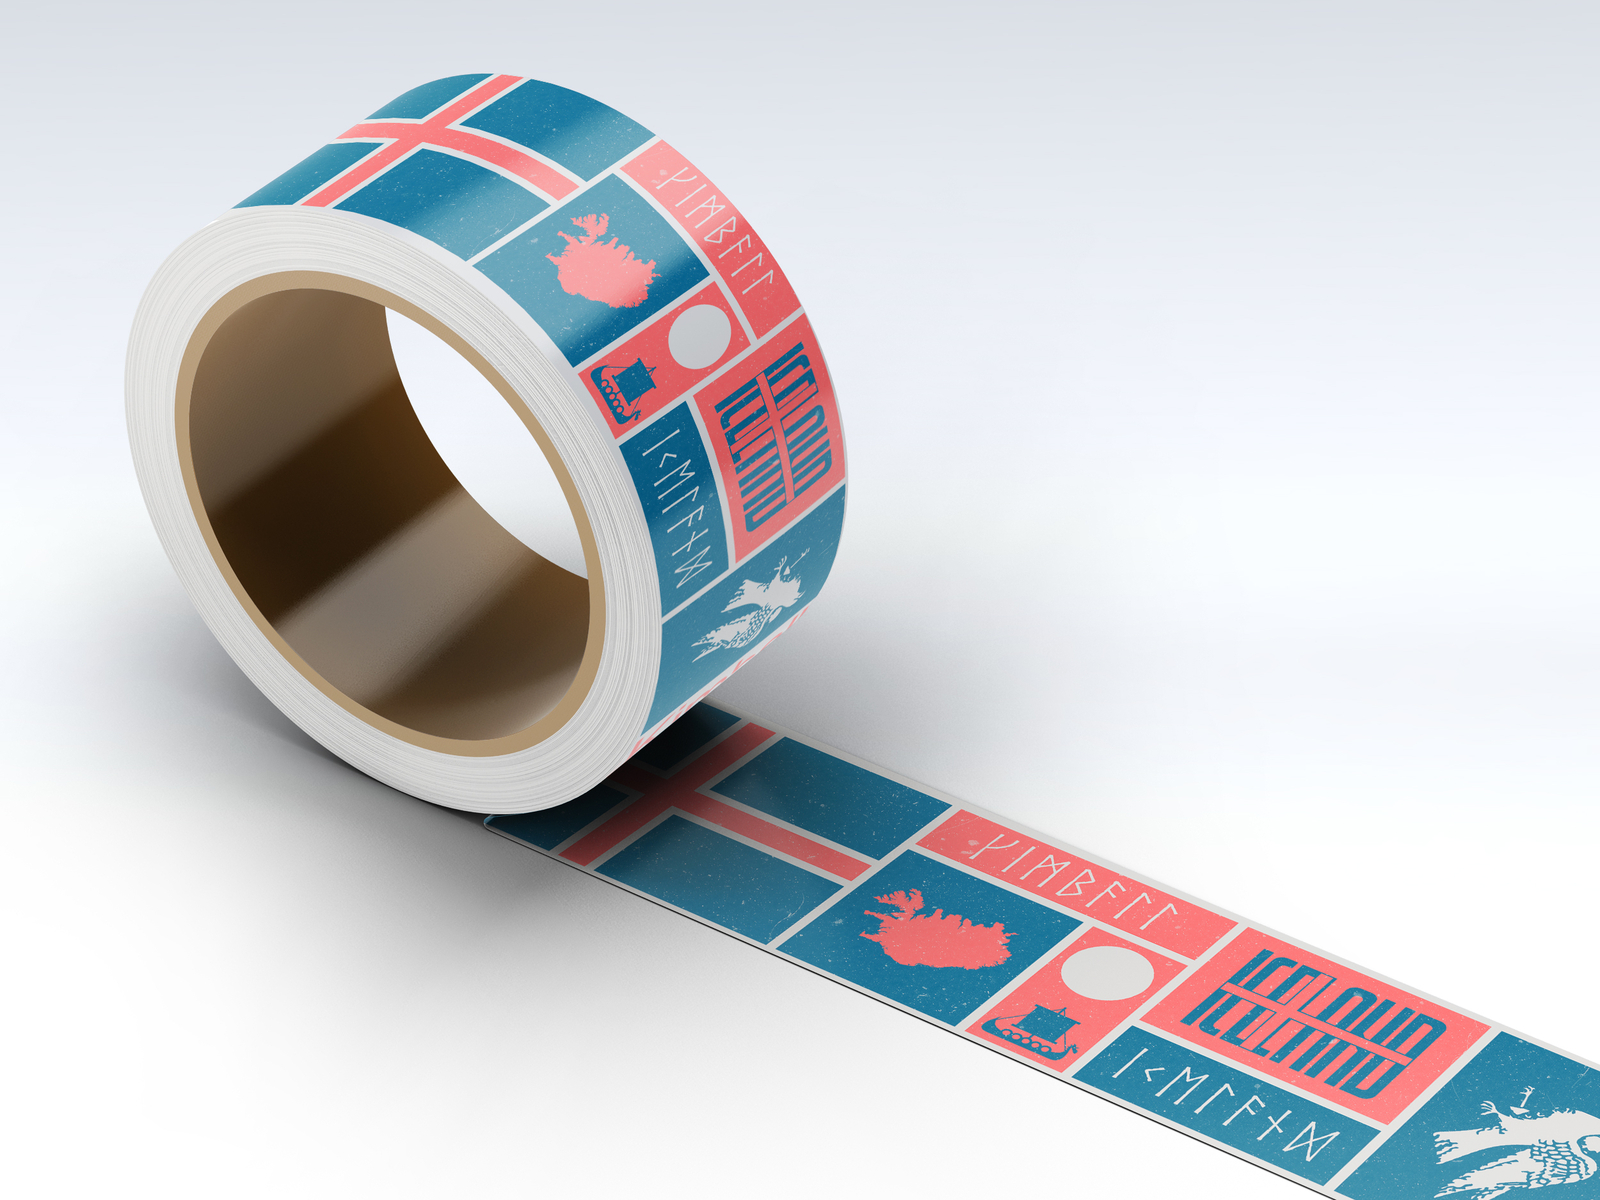 Download Iceland Packing Tape 051619 Mockup by Kenneth Spond on Dribbble